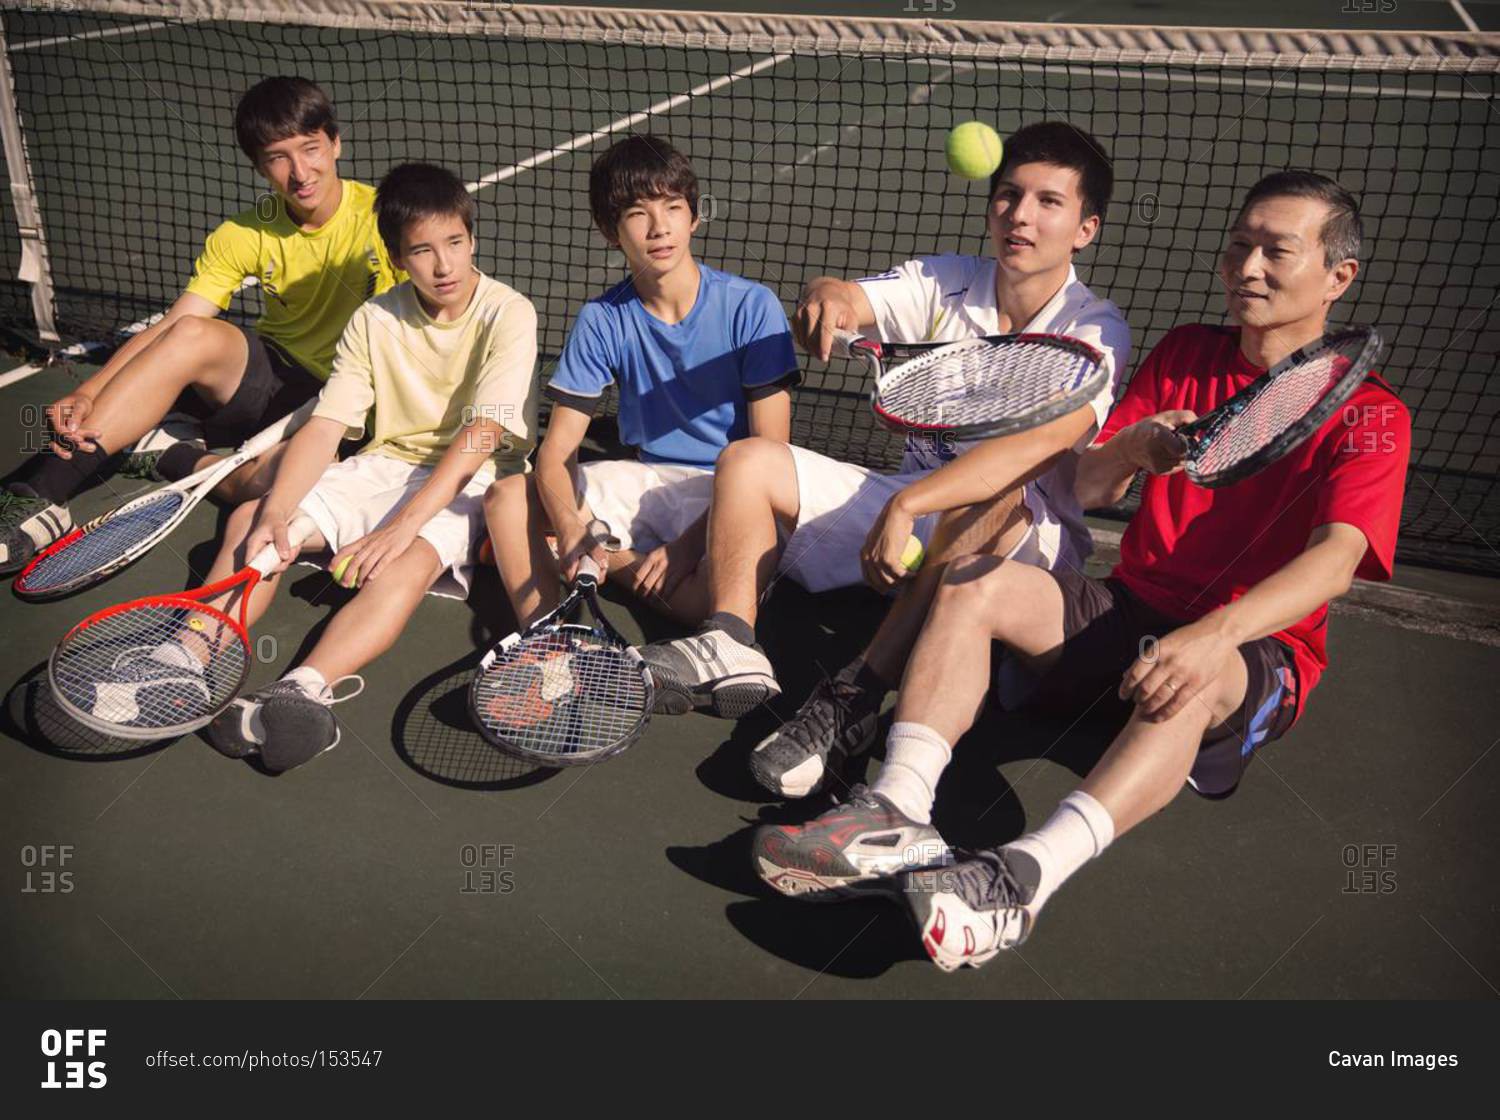 Boys and man resting at tennis net